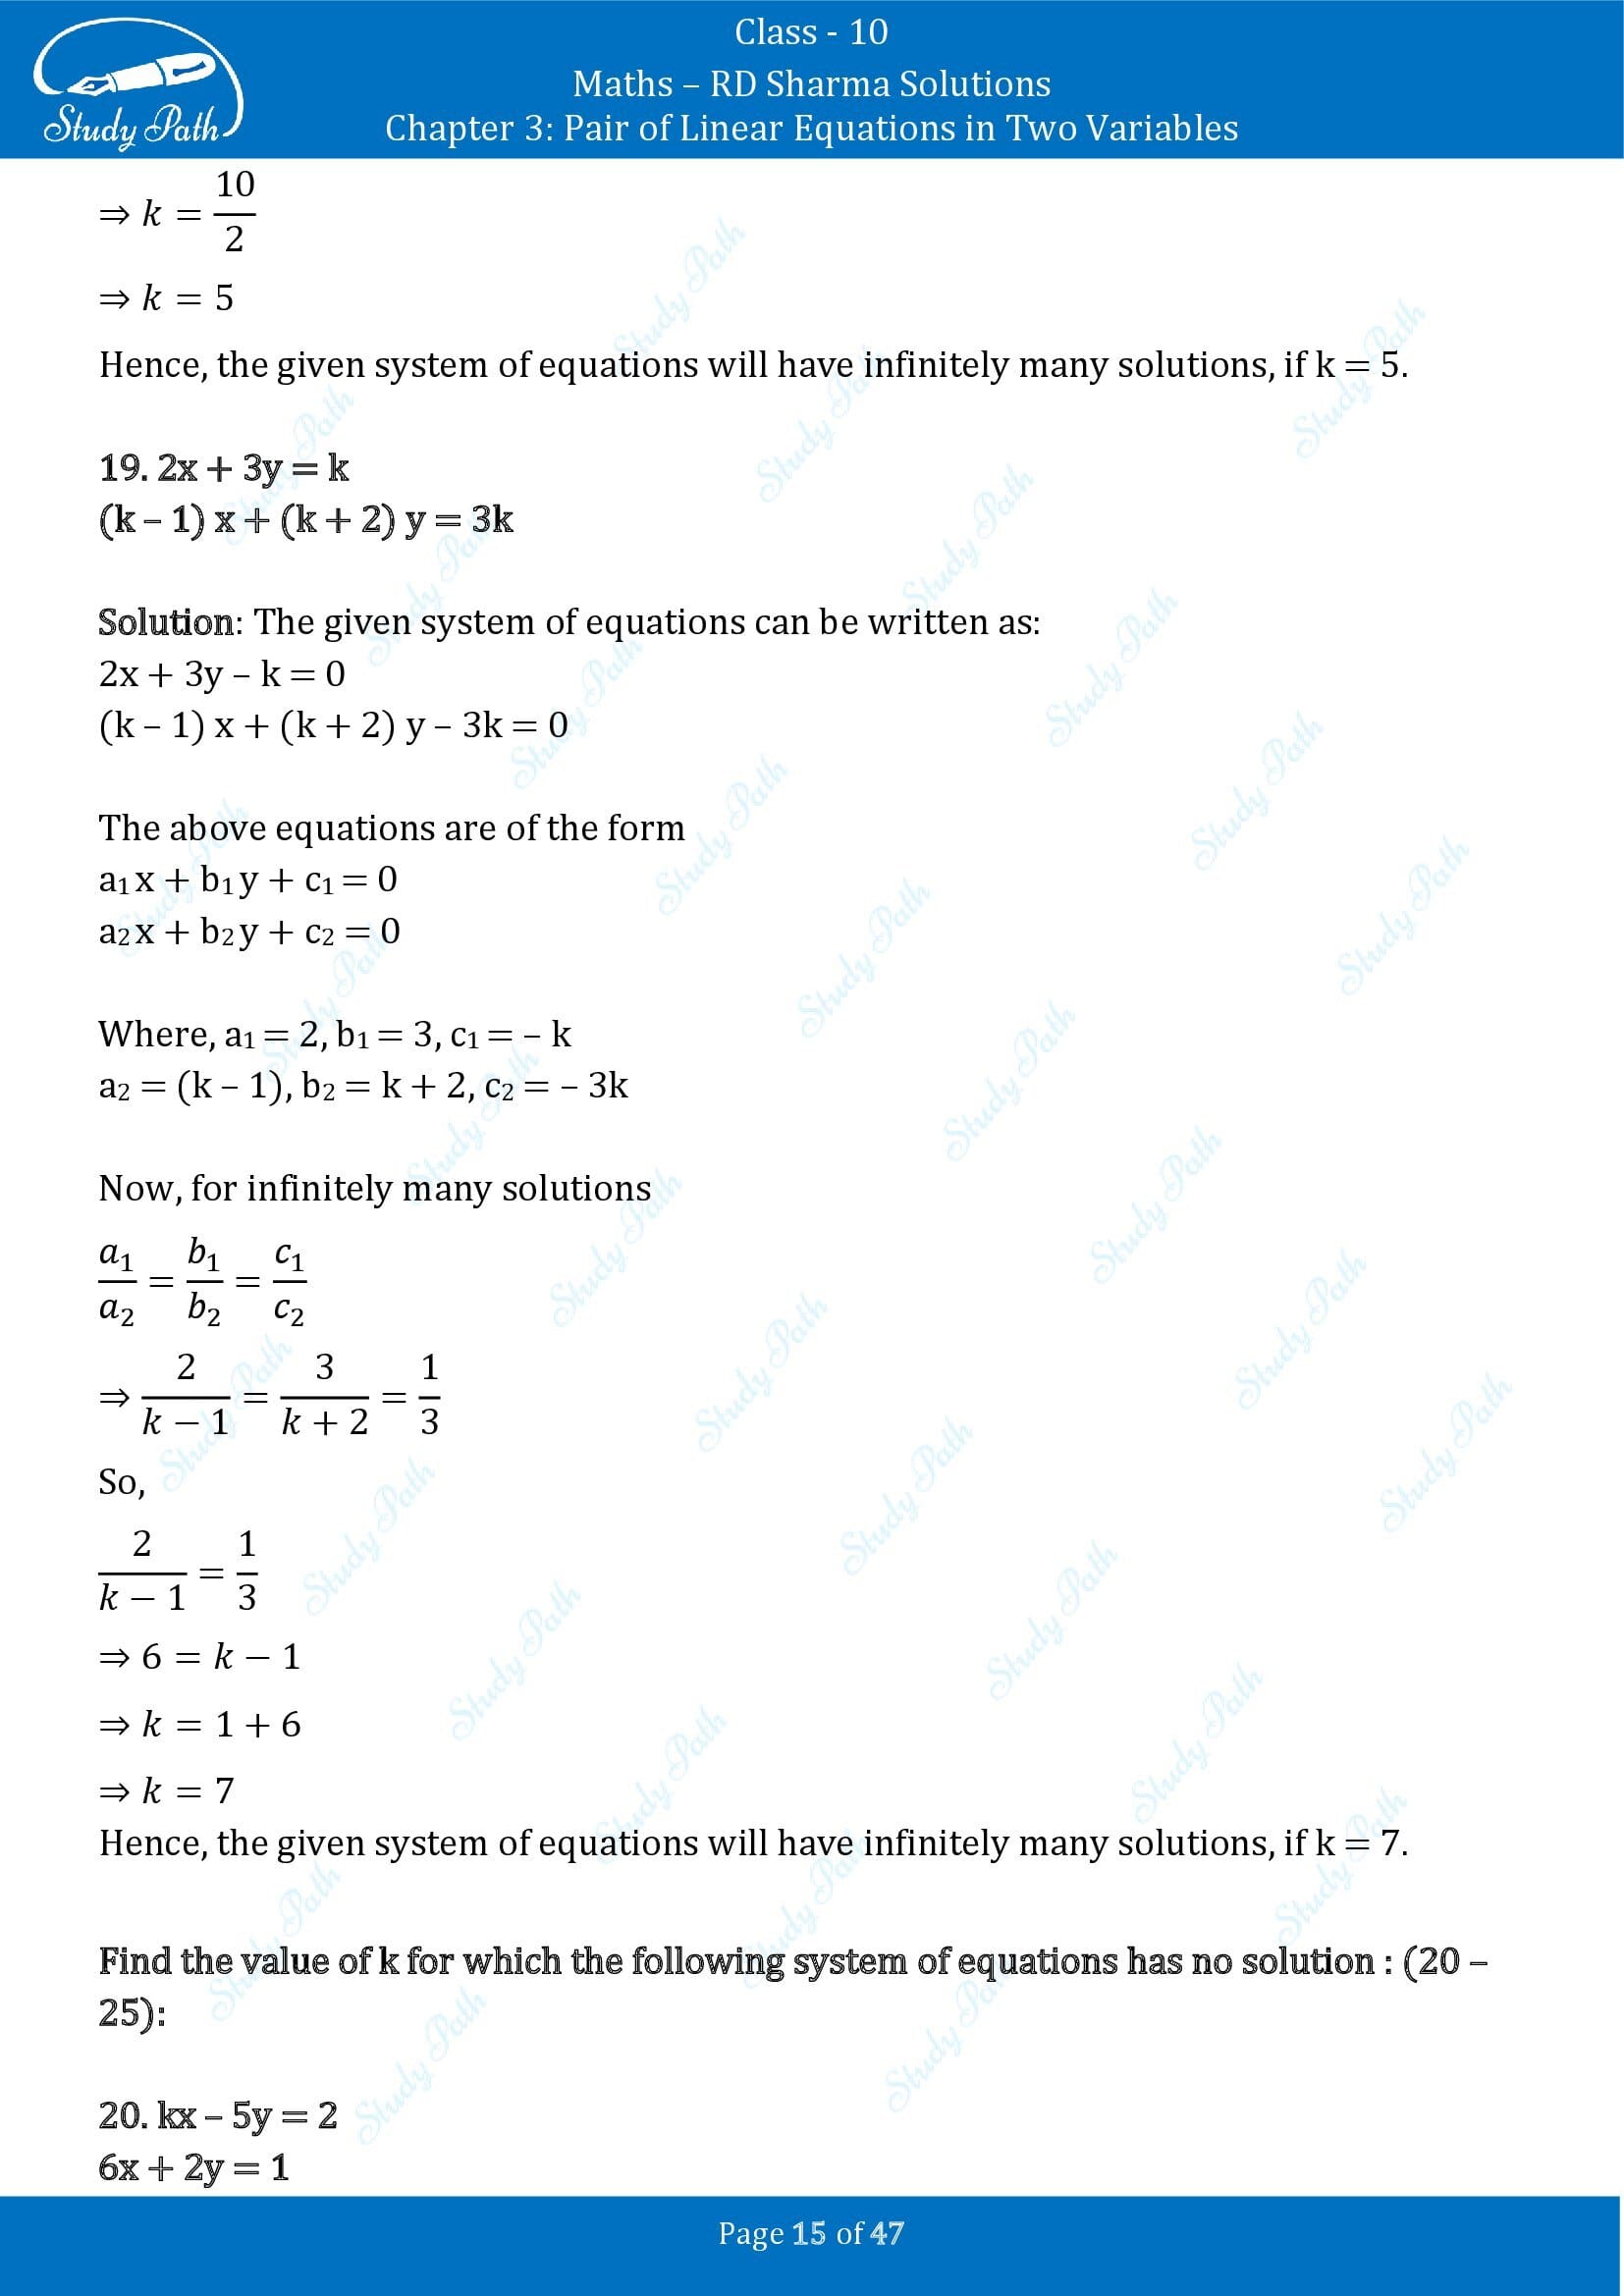 RD Sharma Solutions Class 10 Chapter 3 Pair of Linear Equations in Two Variables Exercise 3.5 00015